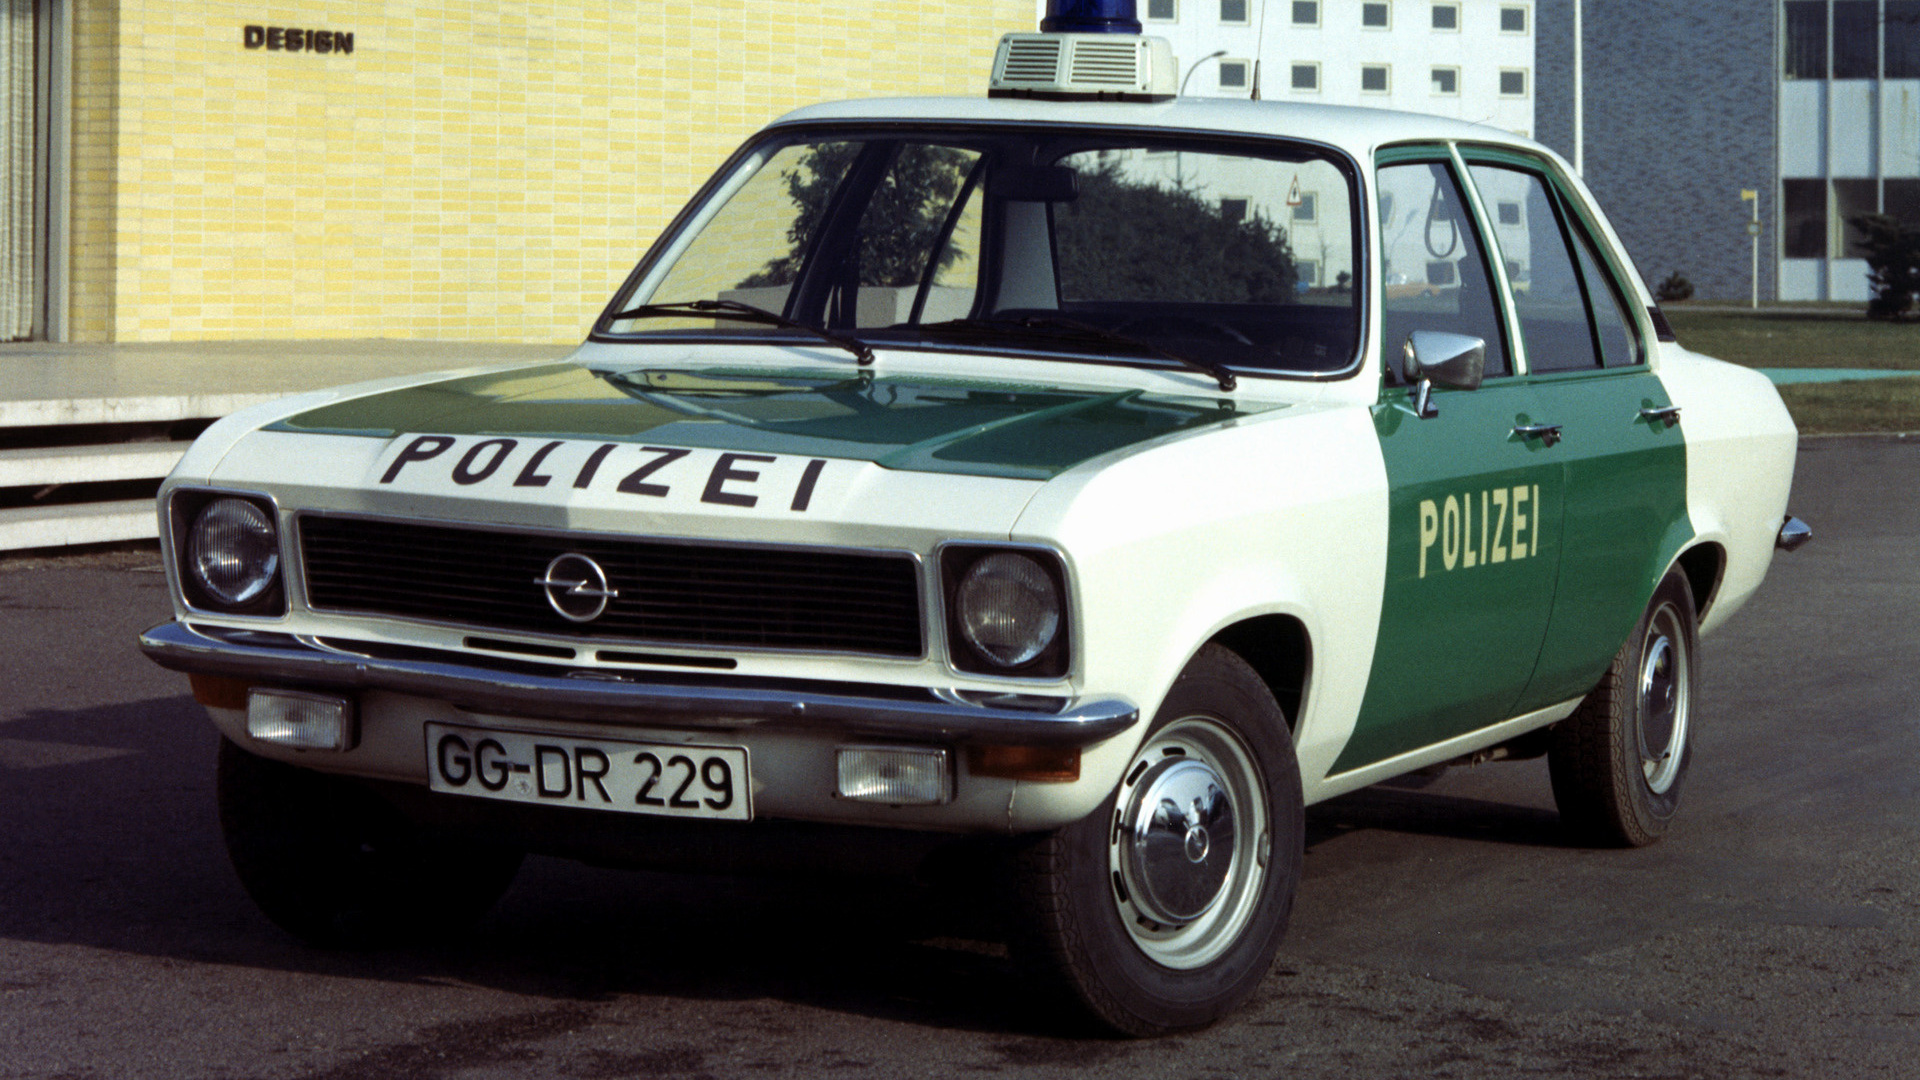 1973 Opel Ascona Polizei - Wallpapers and HD Images | Car Pixel